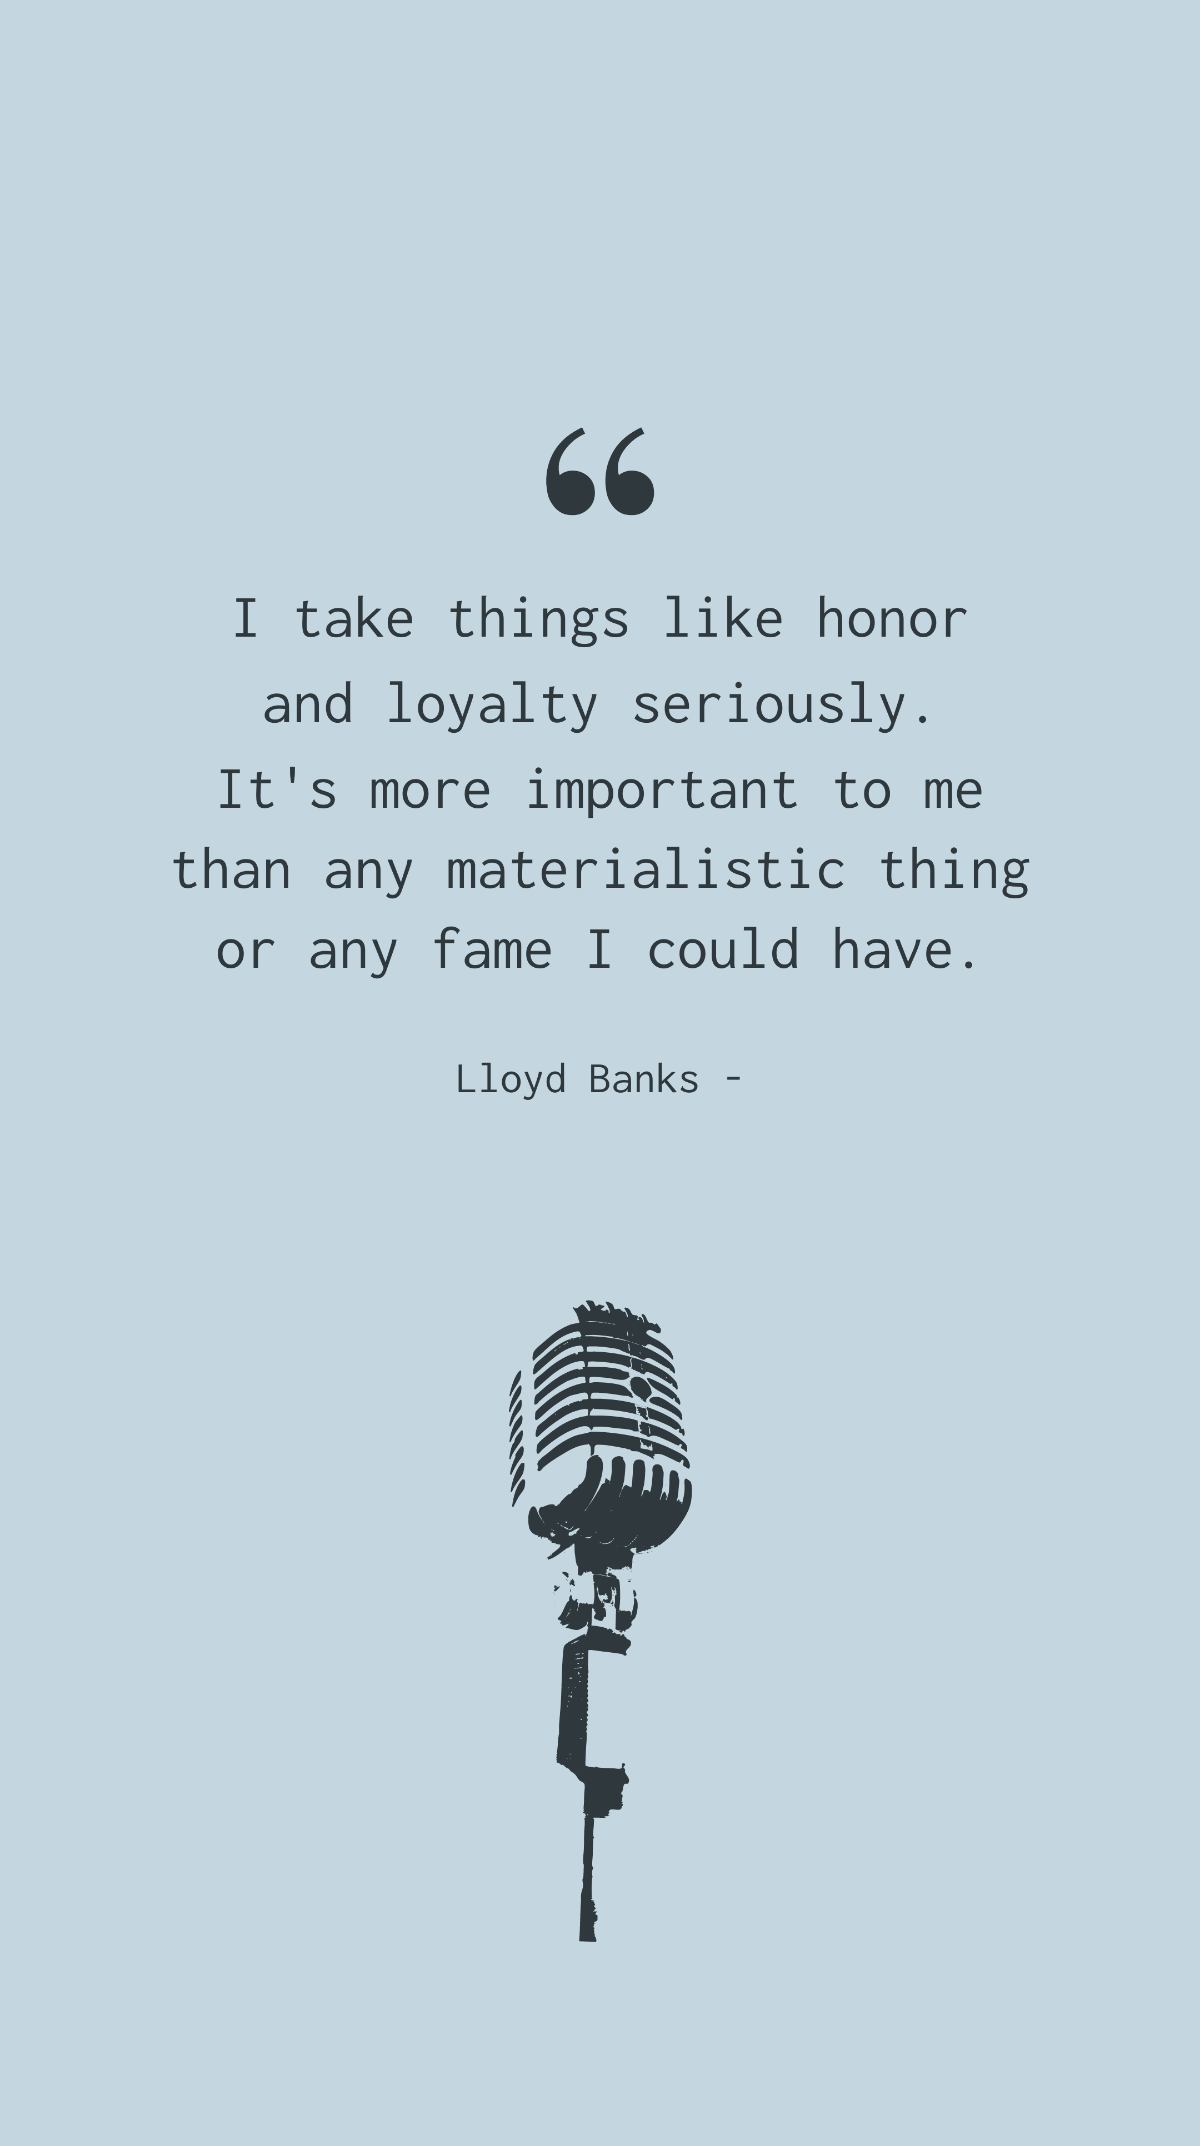 Lloyd Banks - I take things like honor and loyalty seriously. It's more important to me than any materialistic thing or any fame I could have.